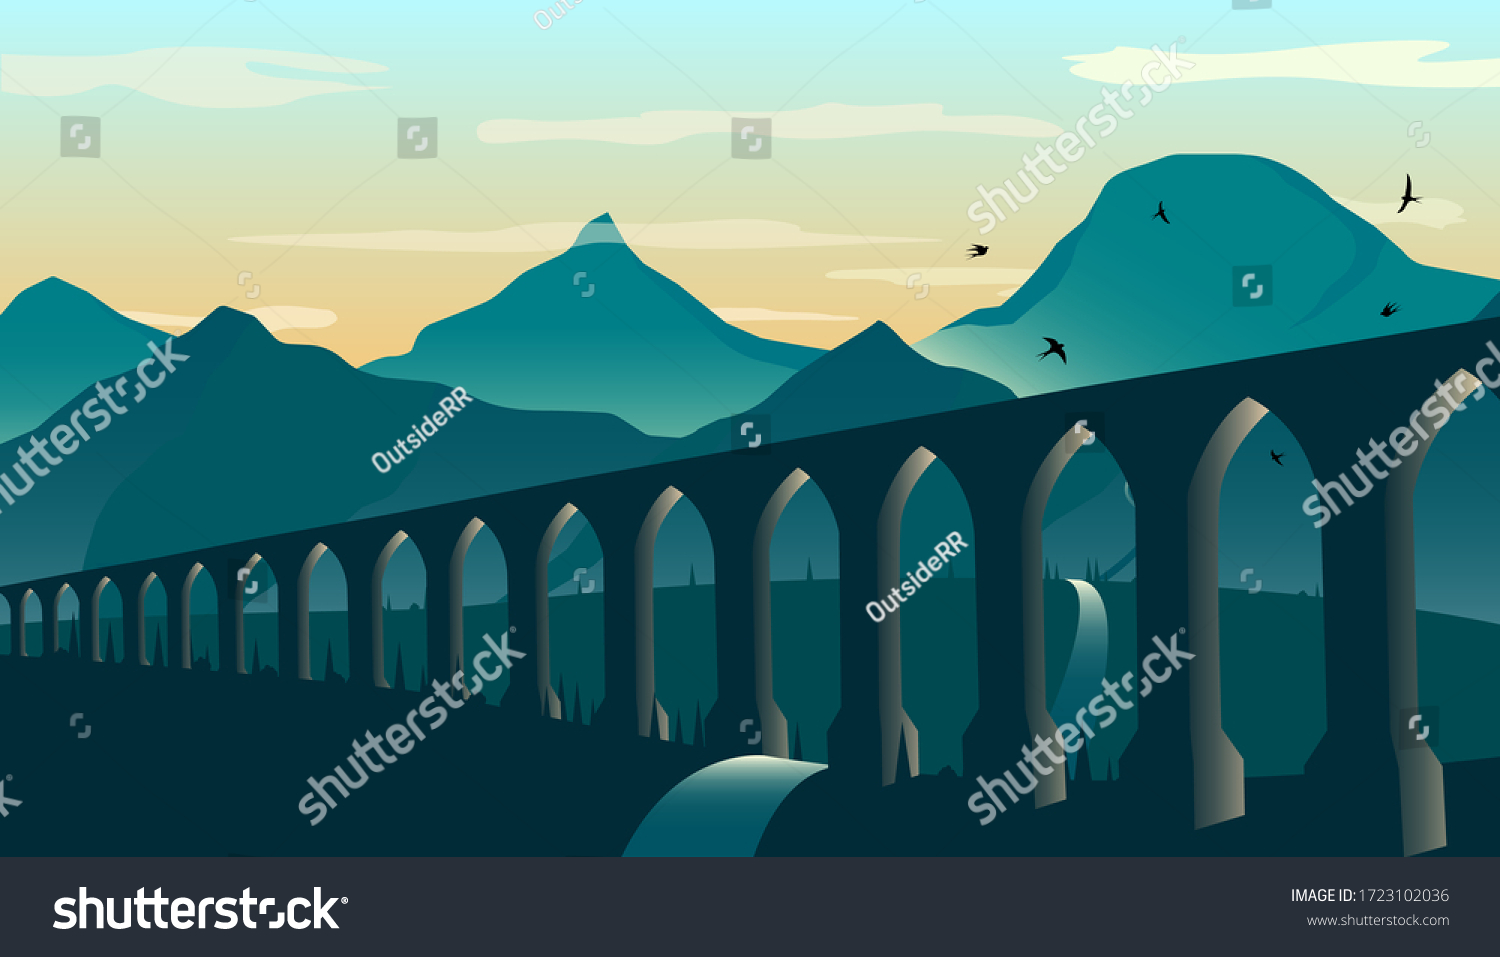 SVG of Antique aqueduct or viaduct, against the backdrop of mountains at dusk. Vector illustration. svg